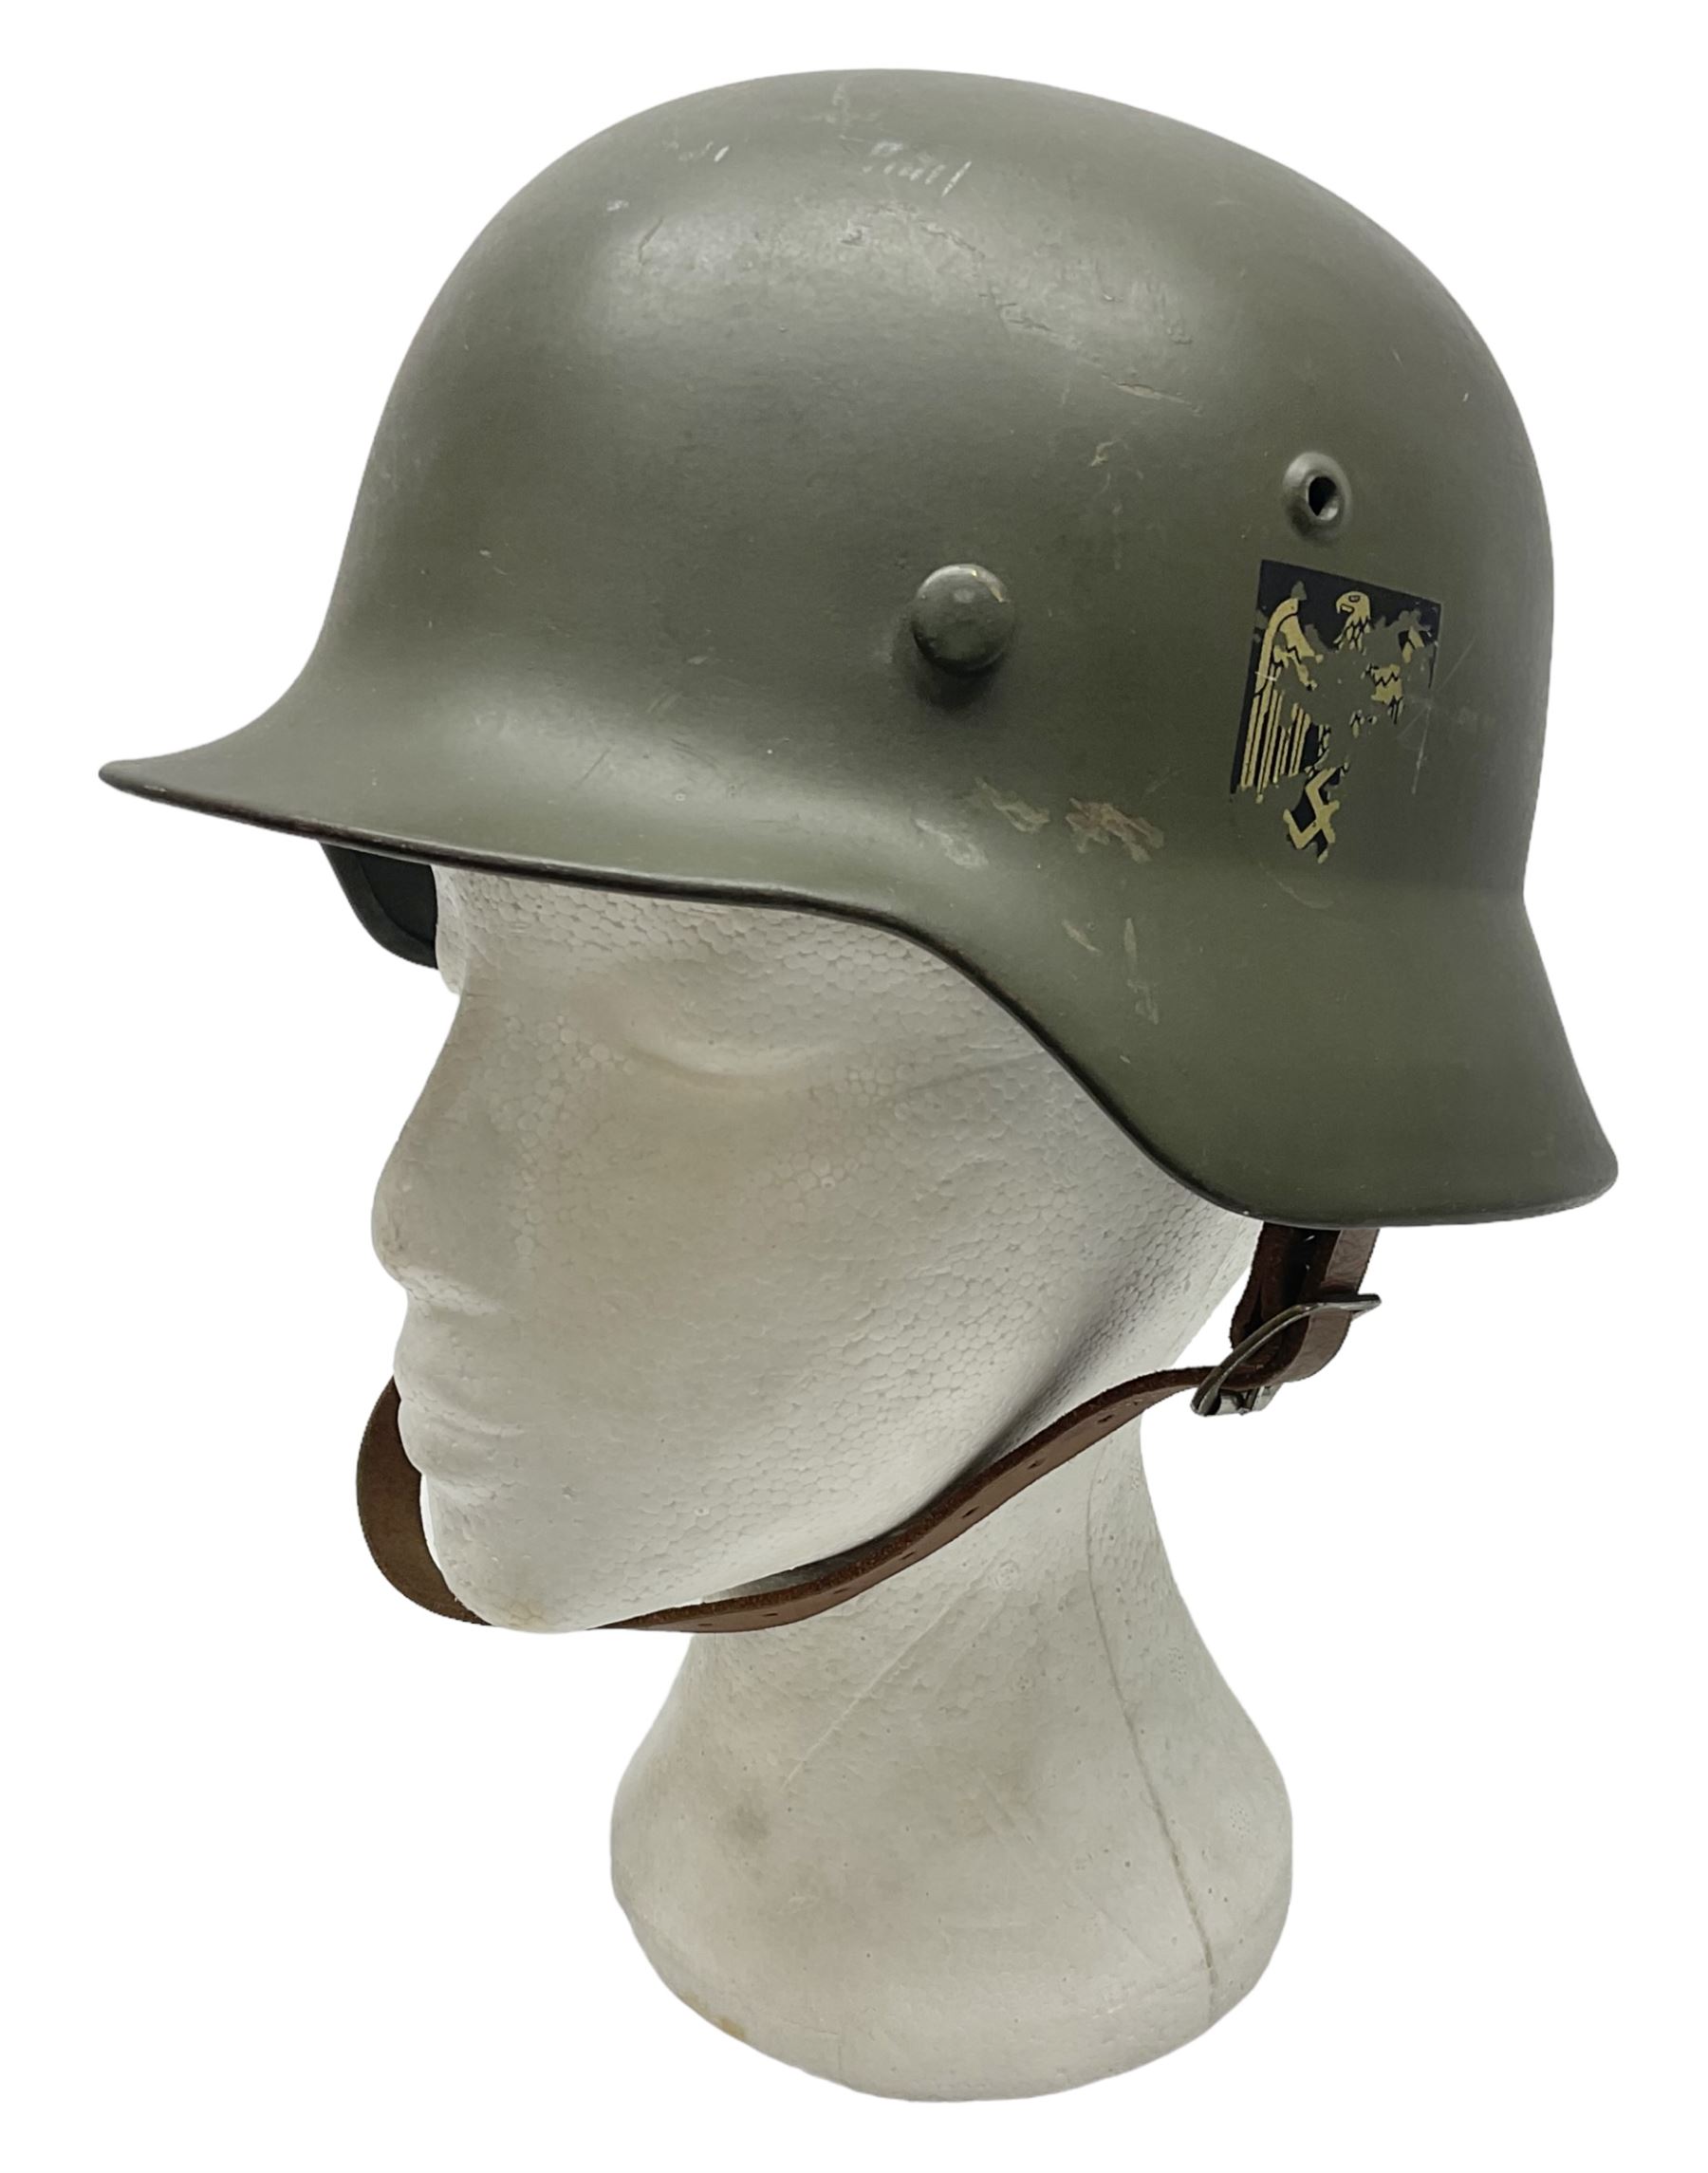 German M35 style steel helmet marked ET60 to the side skirt and 4197 to the back apron